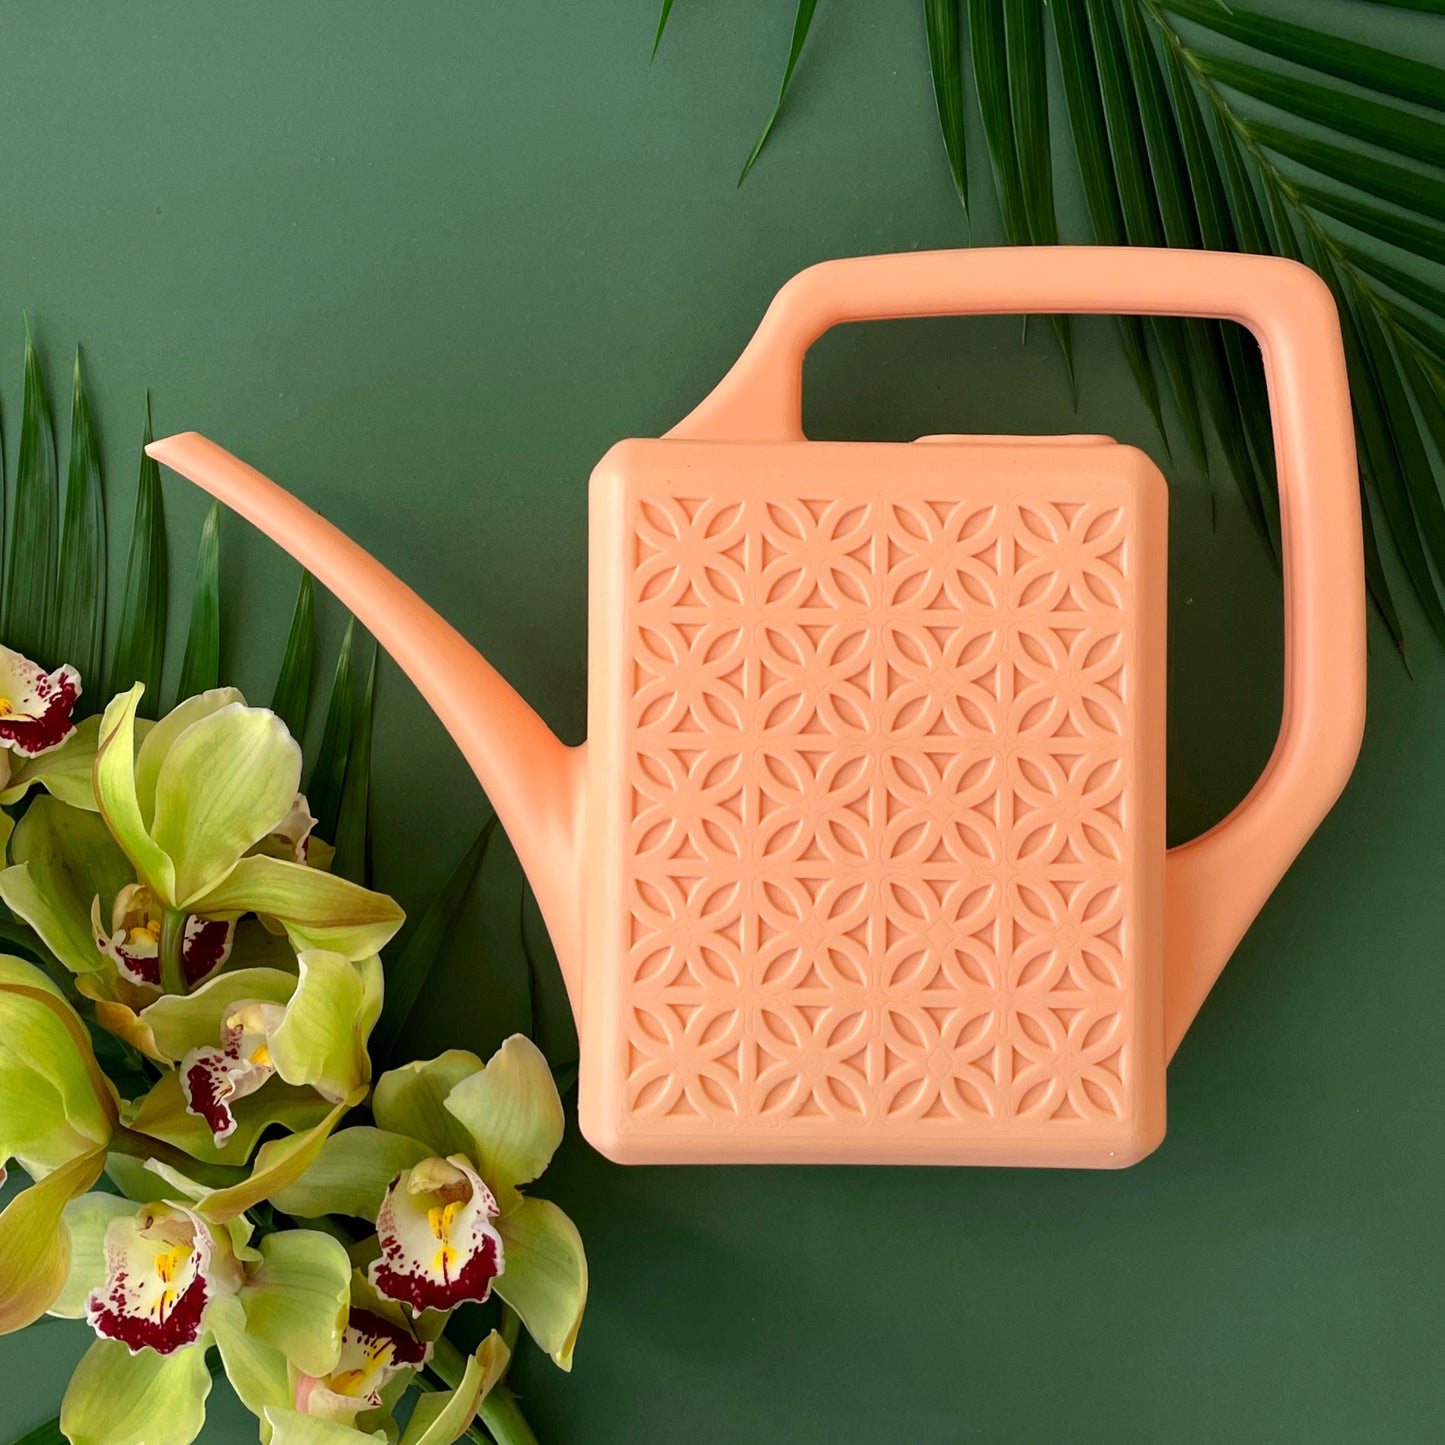 On a dark green background staged with tropical flowers and palm leaves is a light pink plastic watering can with a breeze block design on both sides along with a long spout and a squared-off handle for easy watering.